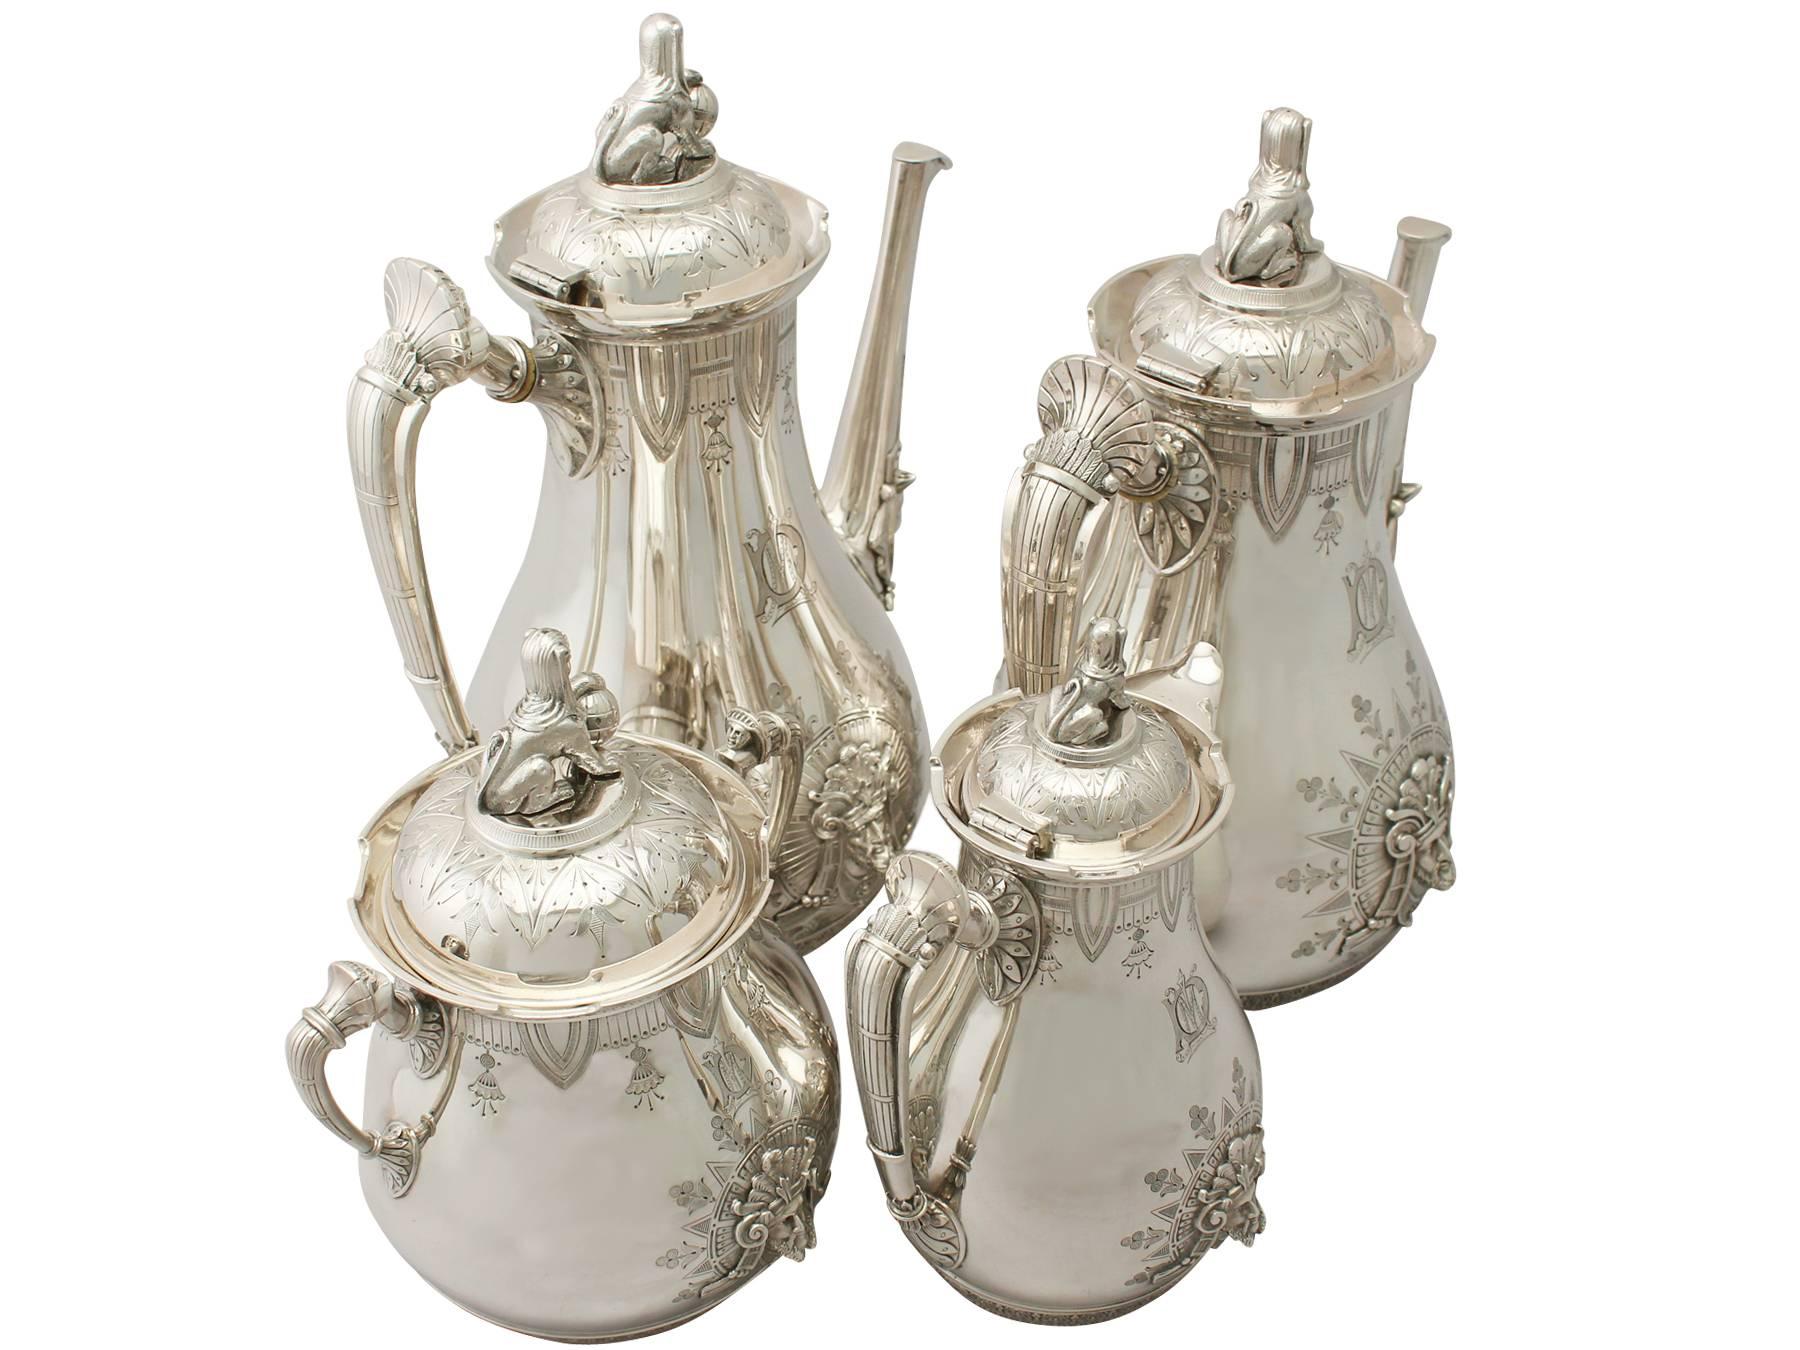 A magnificent, fine and impressive, rare and unusual antique American sterling silver four piece coffee service in the Empire style; an addition to our range of diverse and collectable silverware.

This magnificent antique American sterling silver